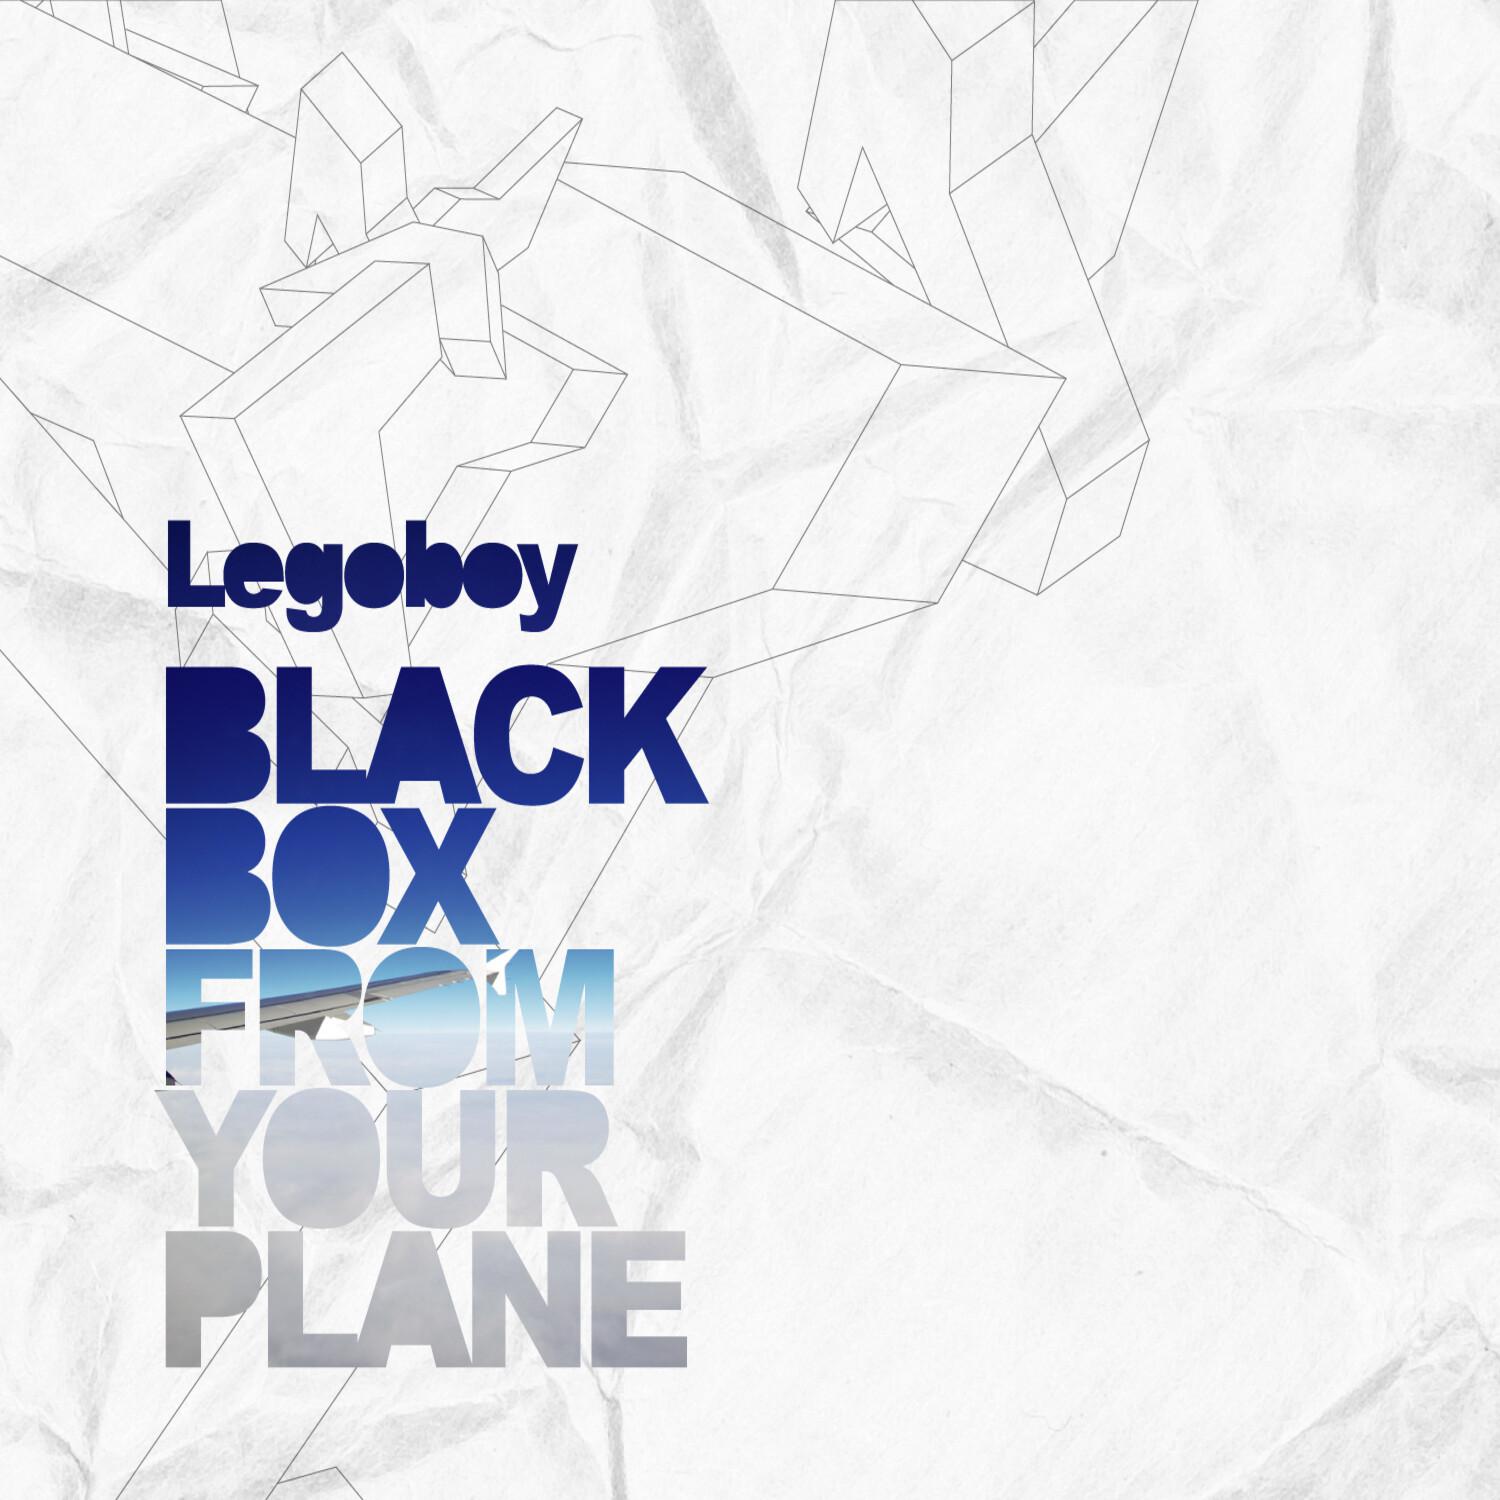 Black Box From Your Plane